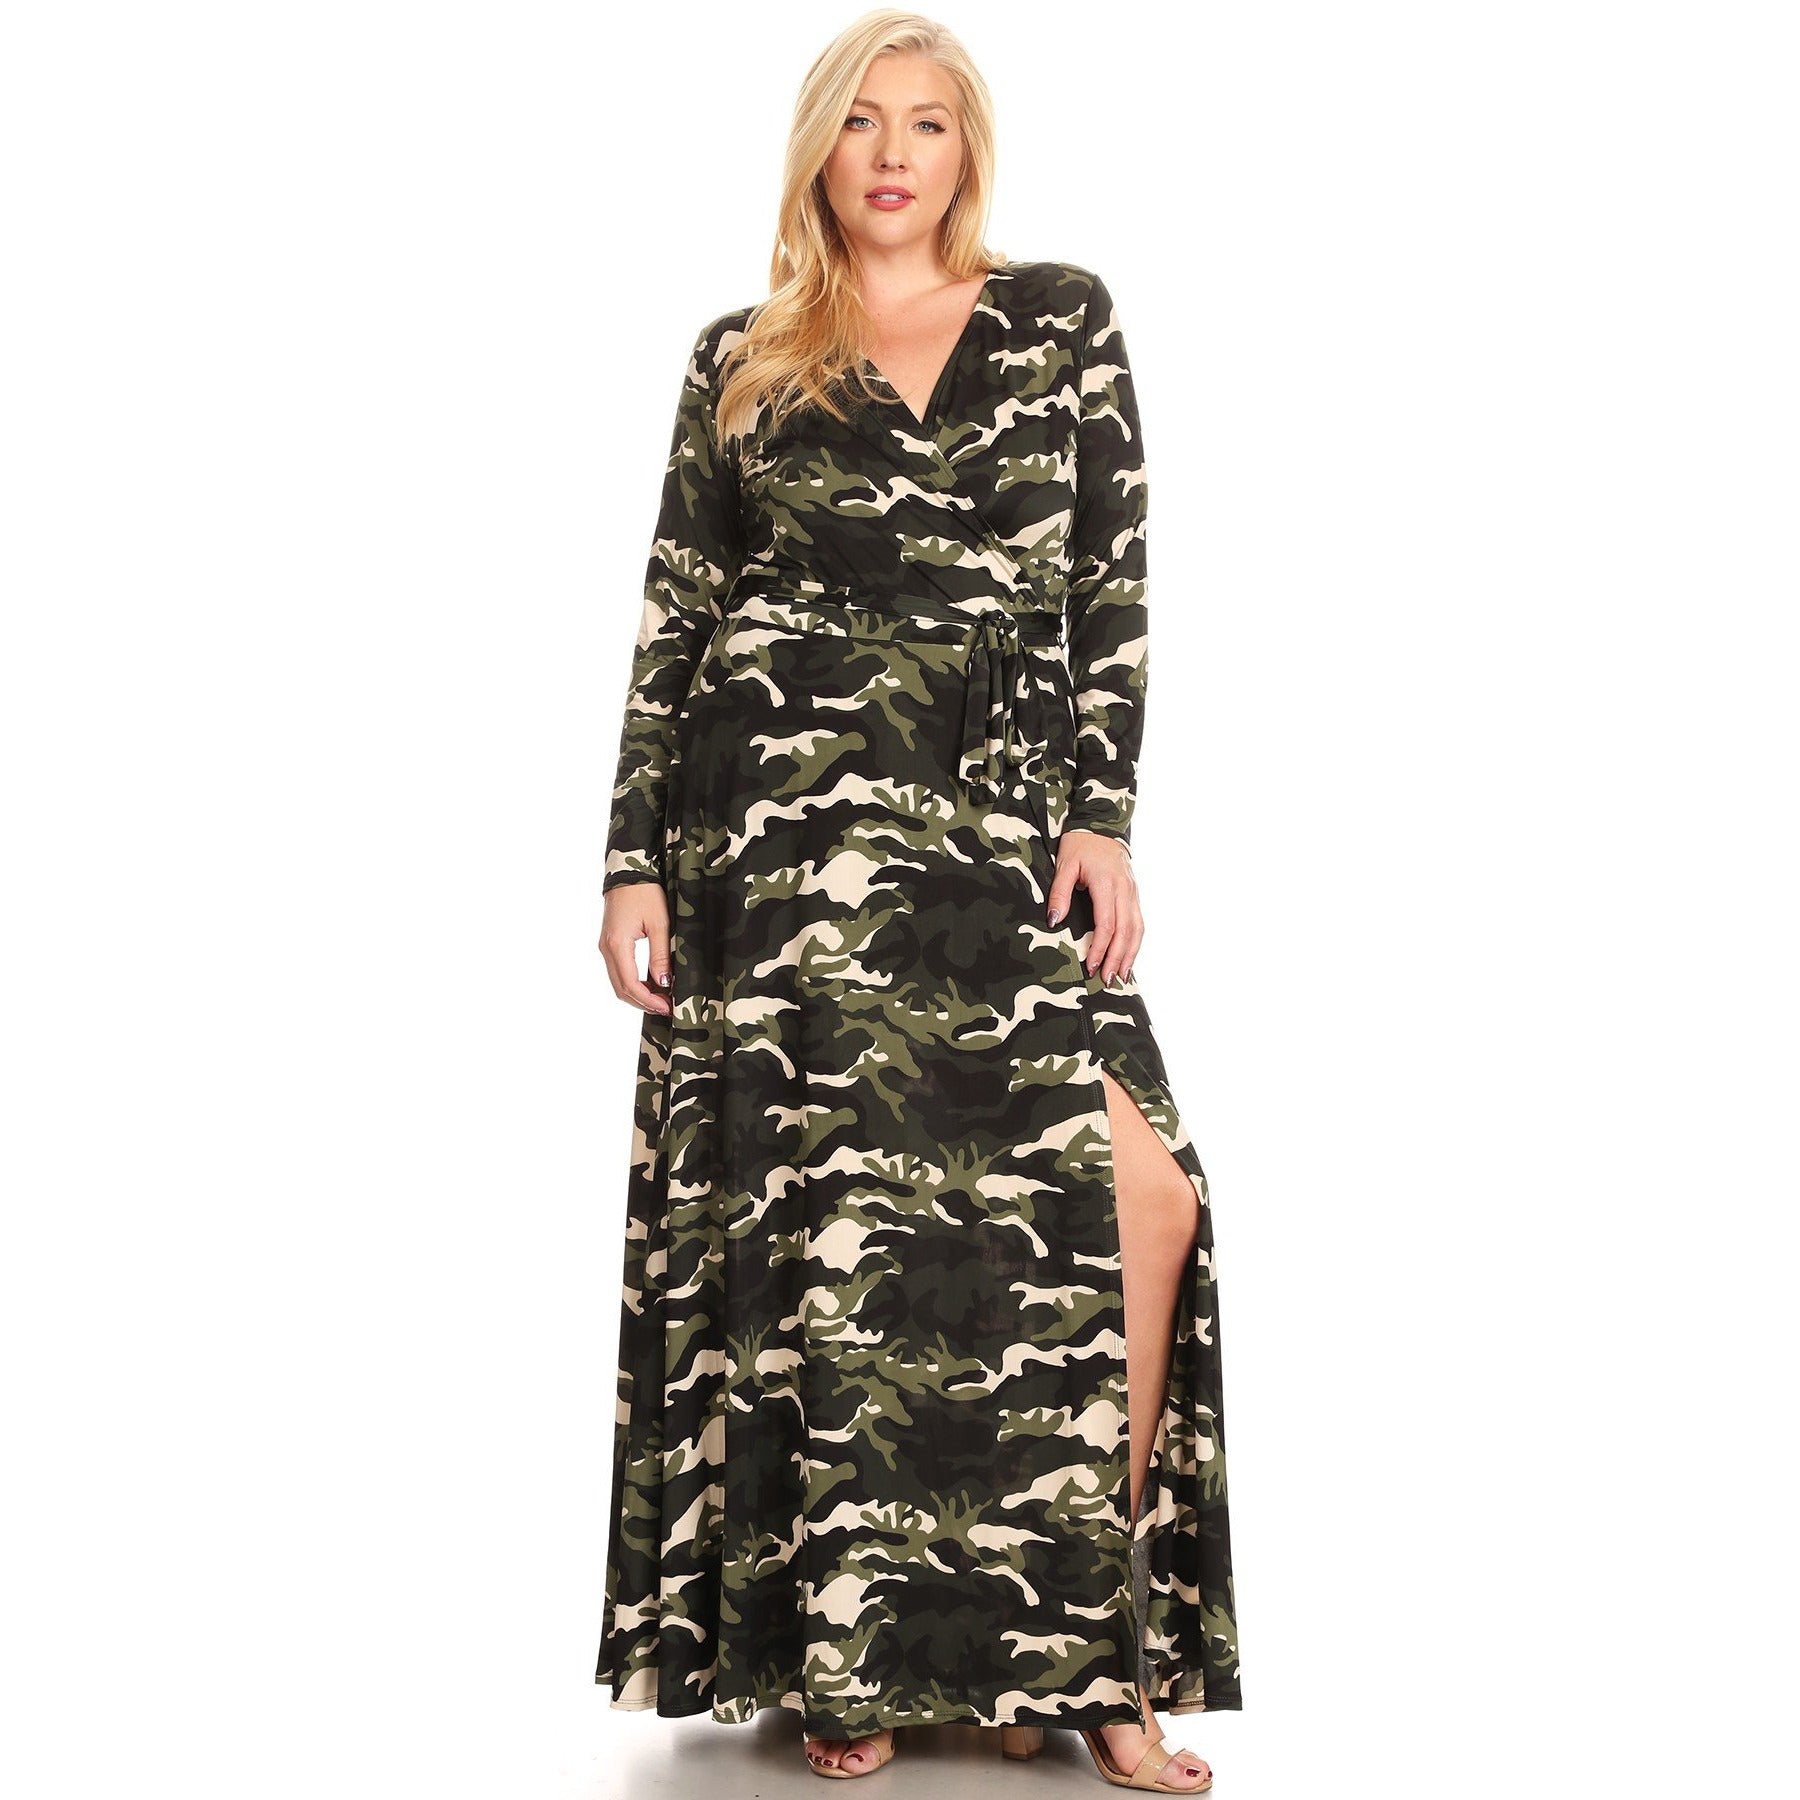 Camouflage Maxi Dress - Ariya's Apparel and Accessories